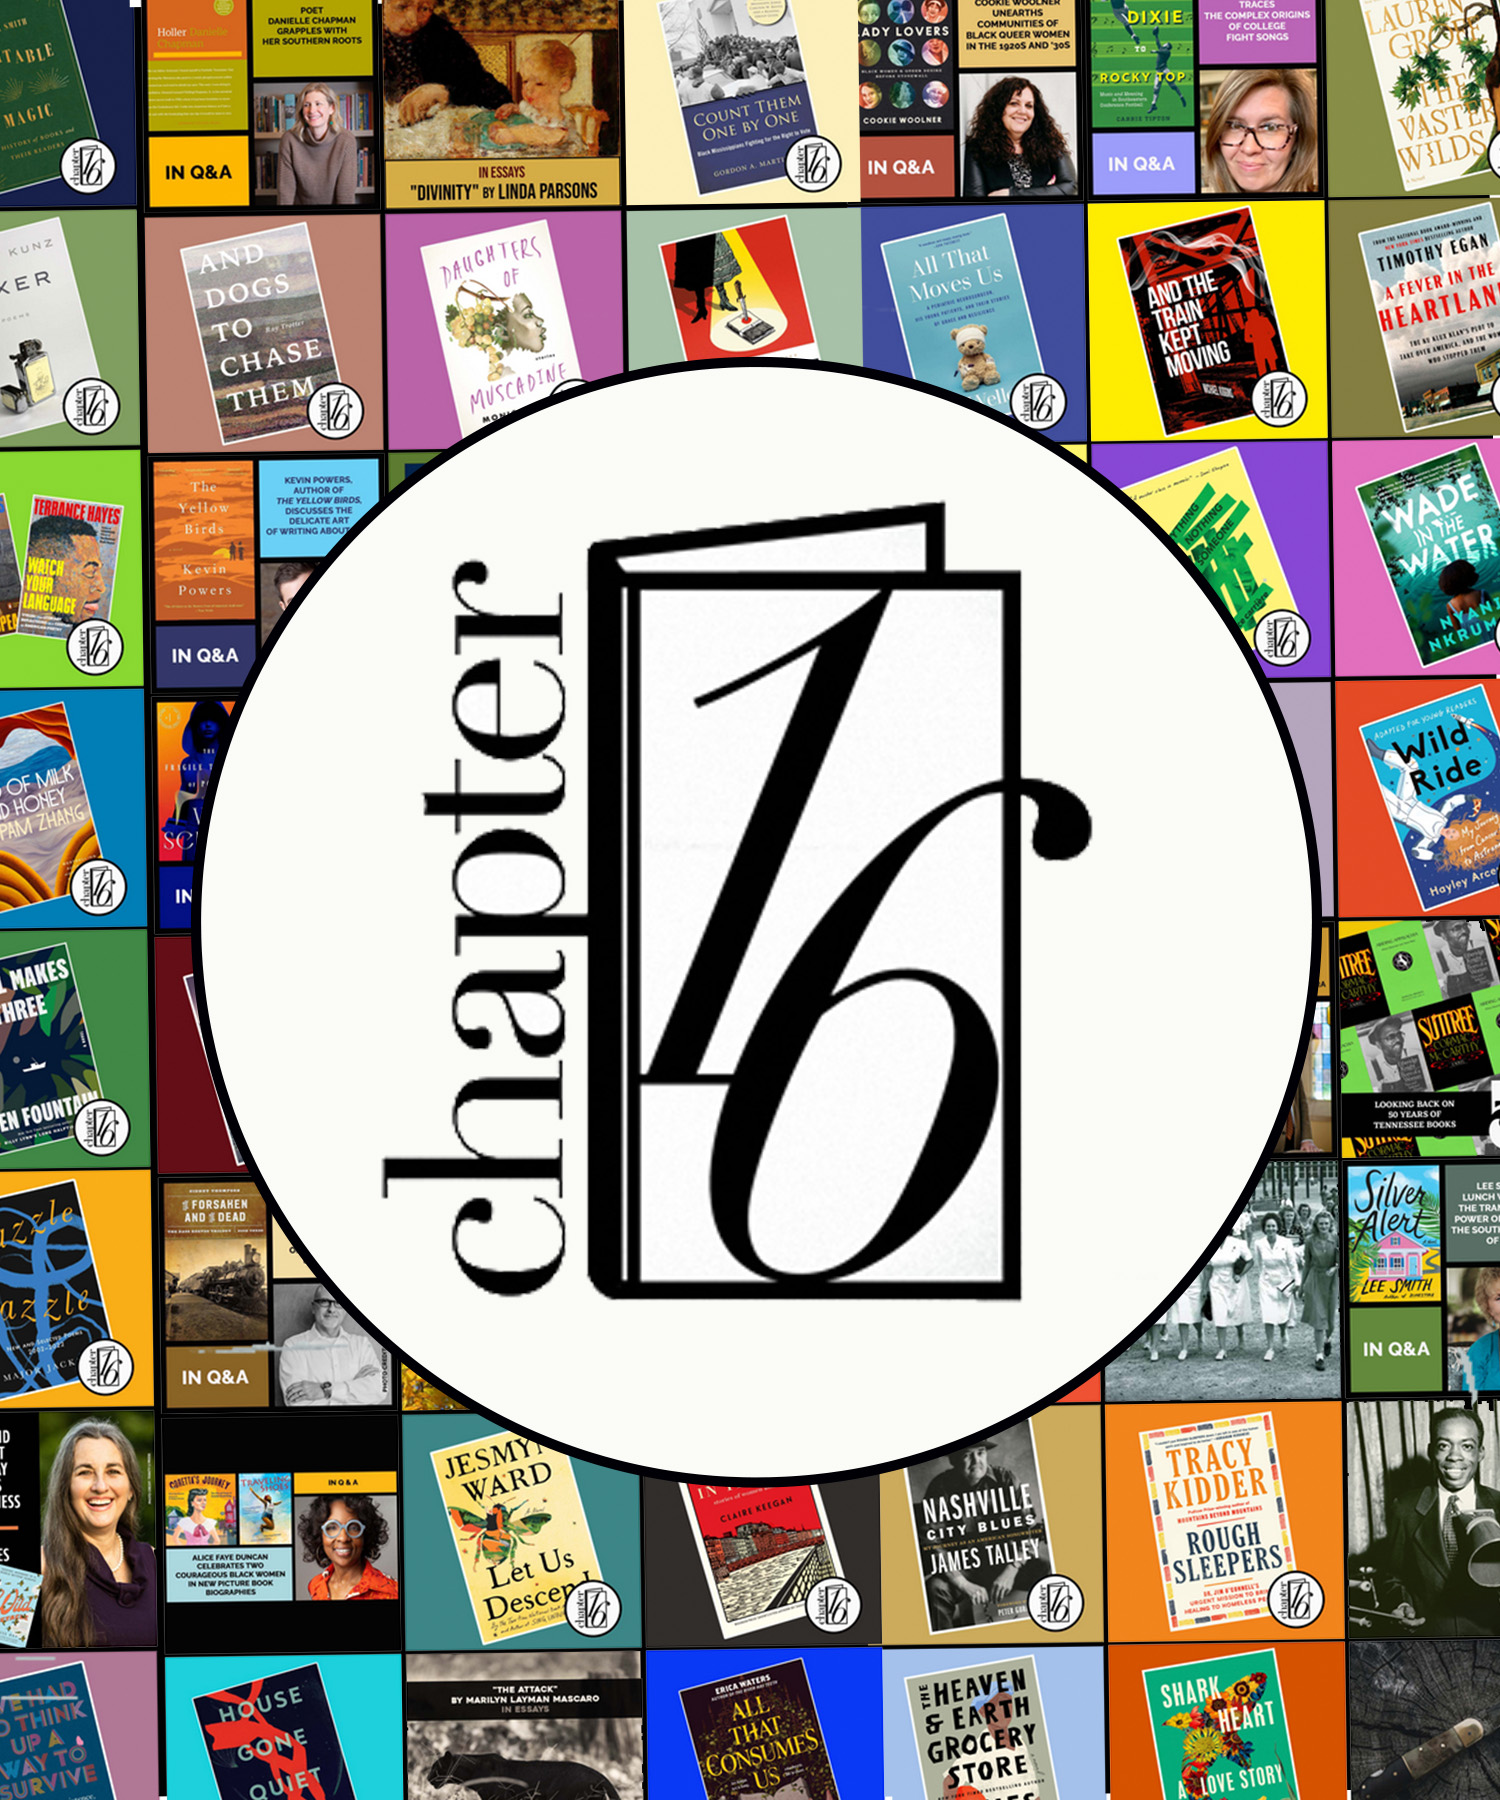 Chapter16 logo over colorful array of book covers and authors